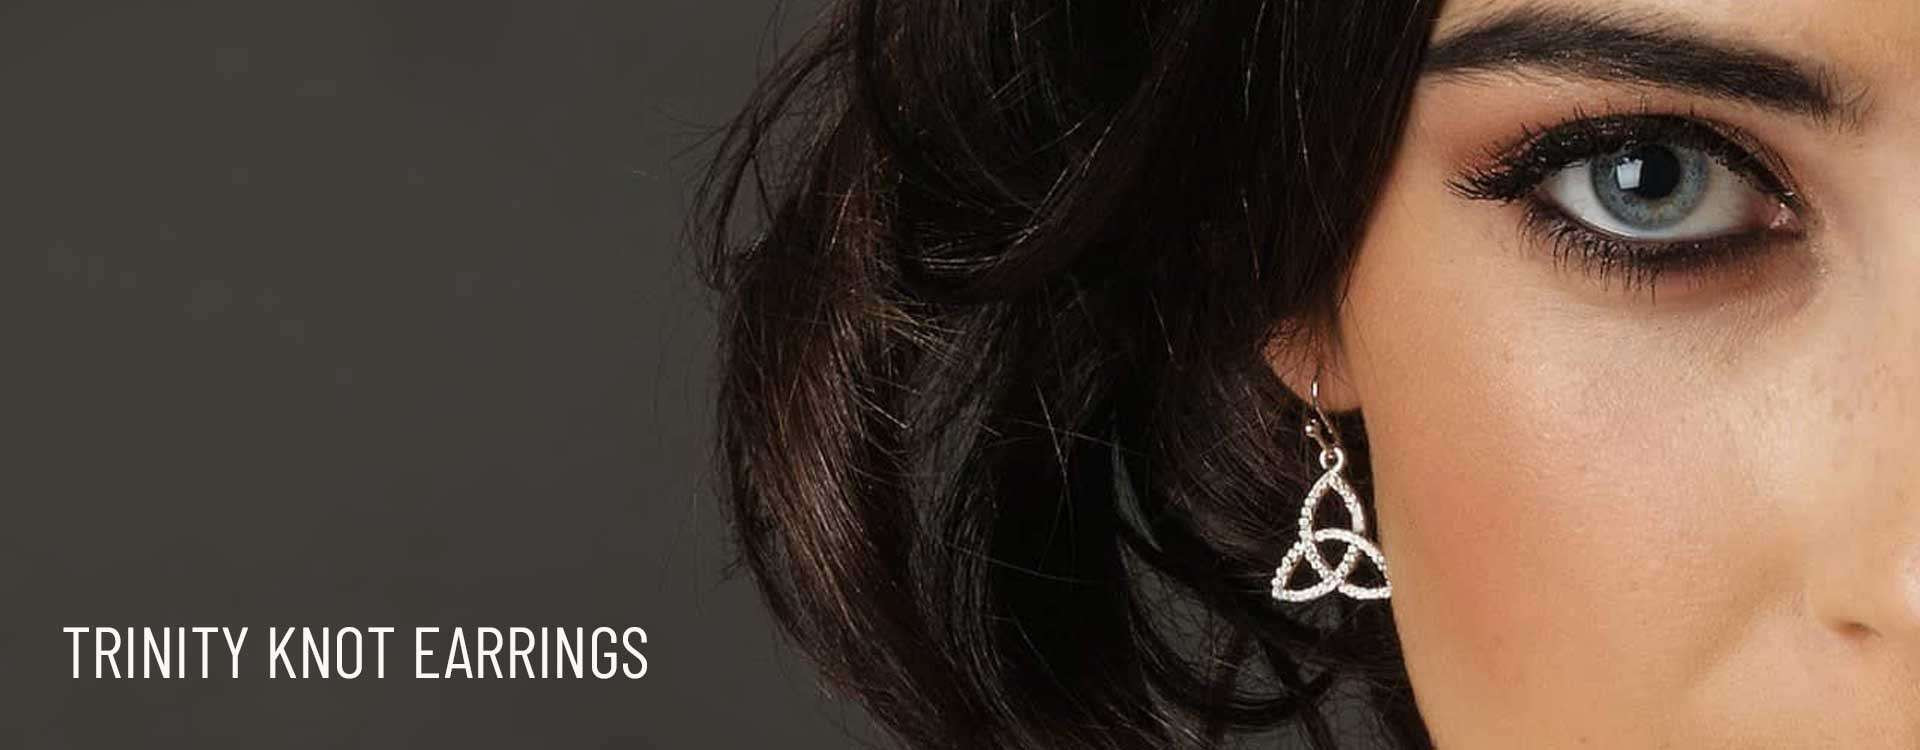 Product Highlight: Trinity Knot Earrings with Crystals